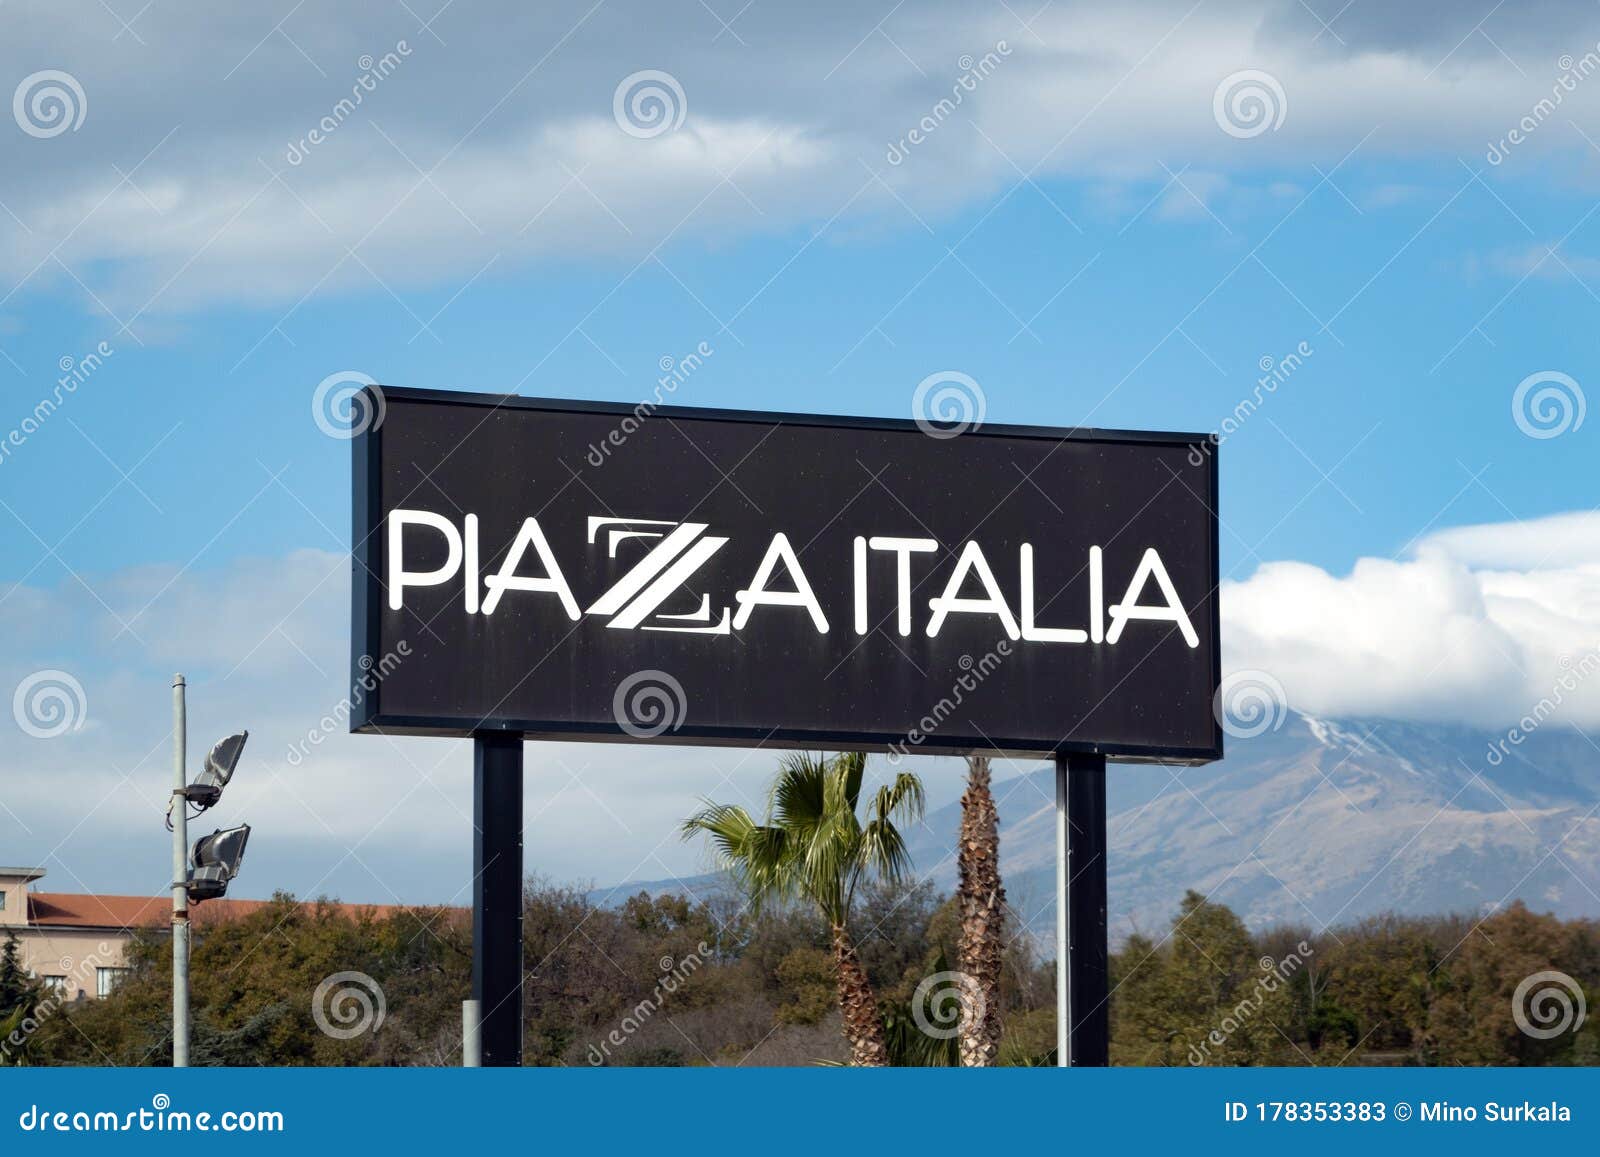 https://thumbs.dreamstime.com/z/banner-piazza-italia-fashion-company-which-sells-clothing-men-women-kids-sicily-february-178353383.jpg